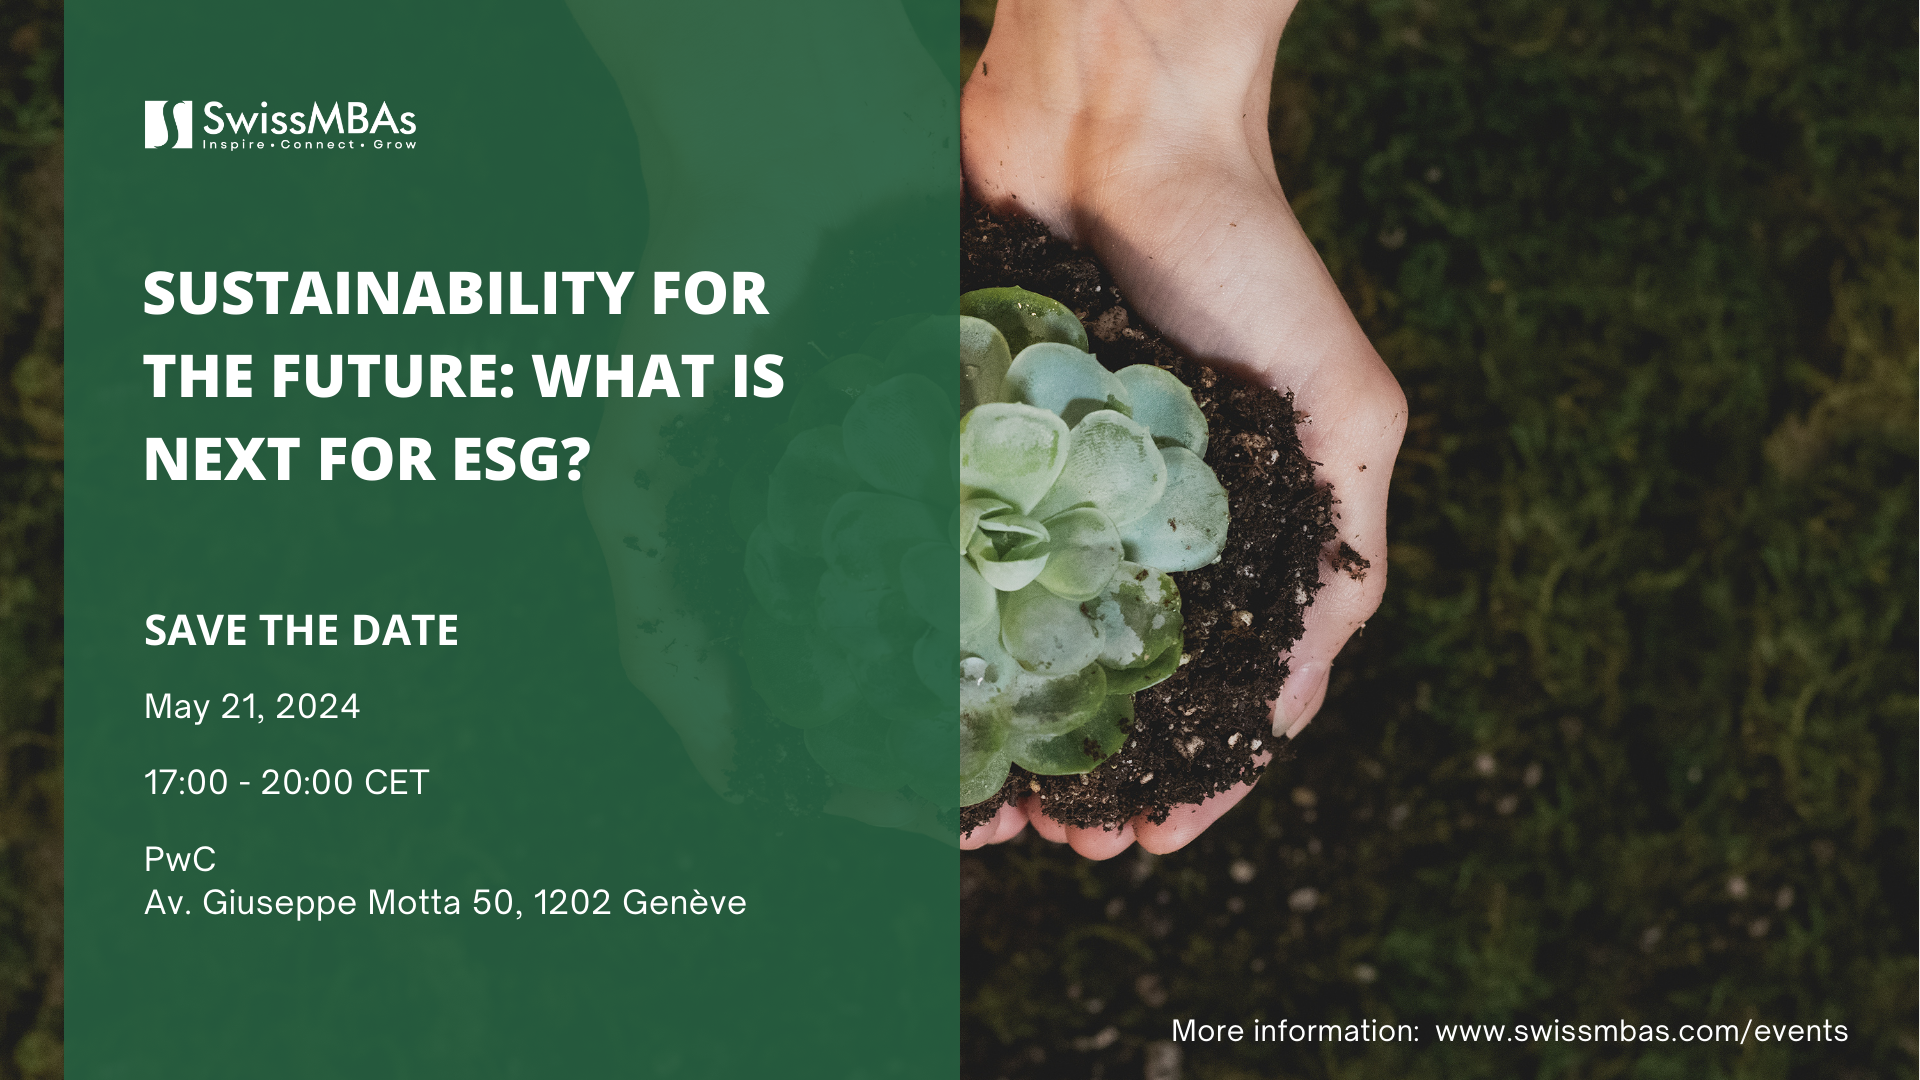 Sustainability for the Future: What is Next for ESG?